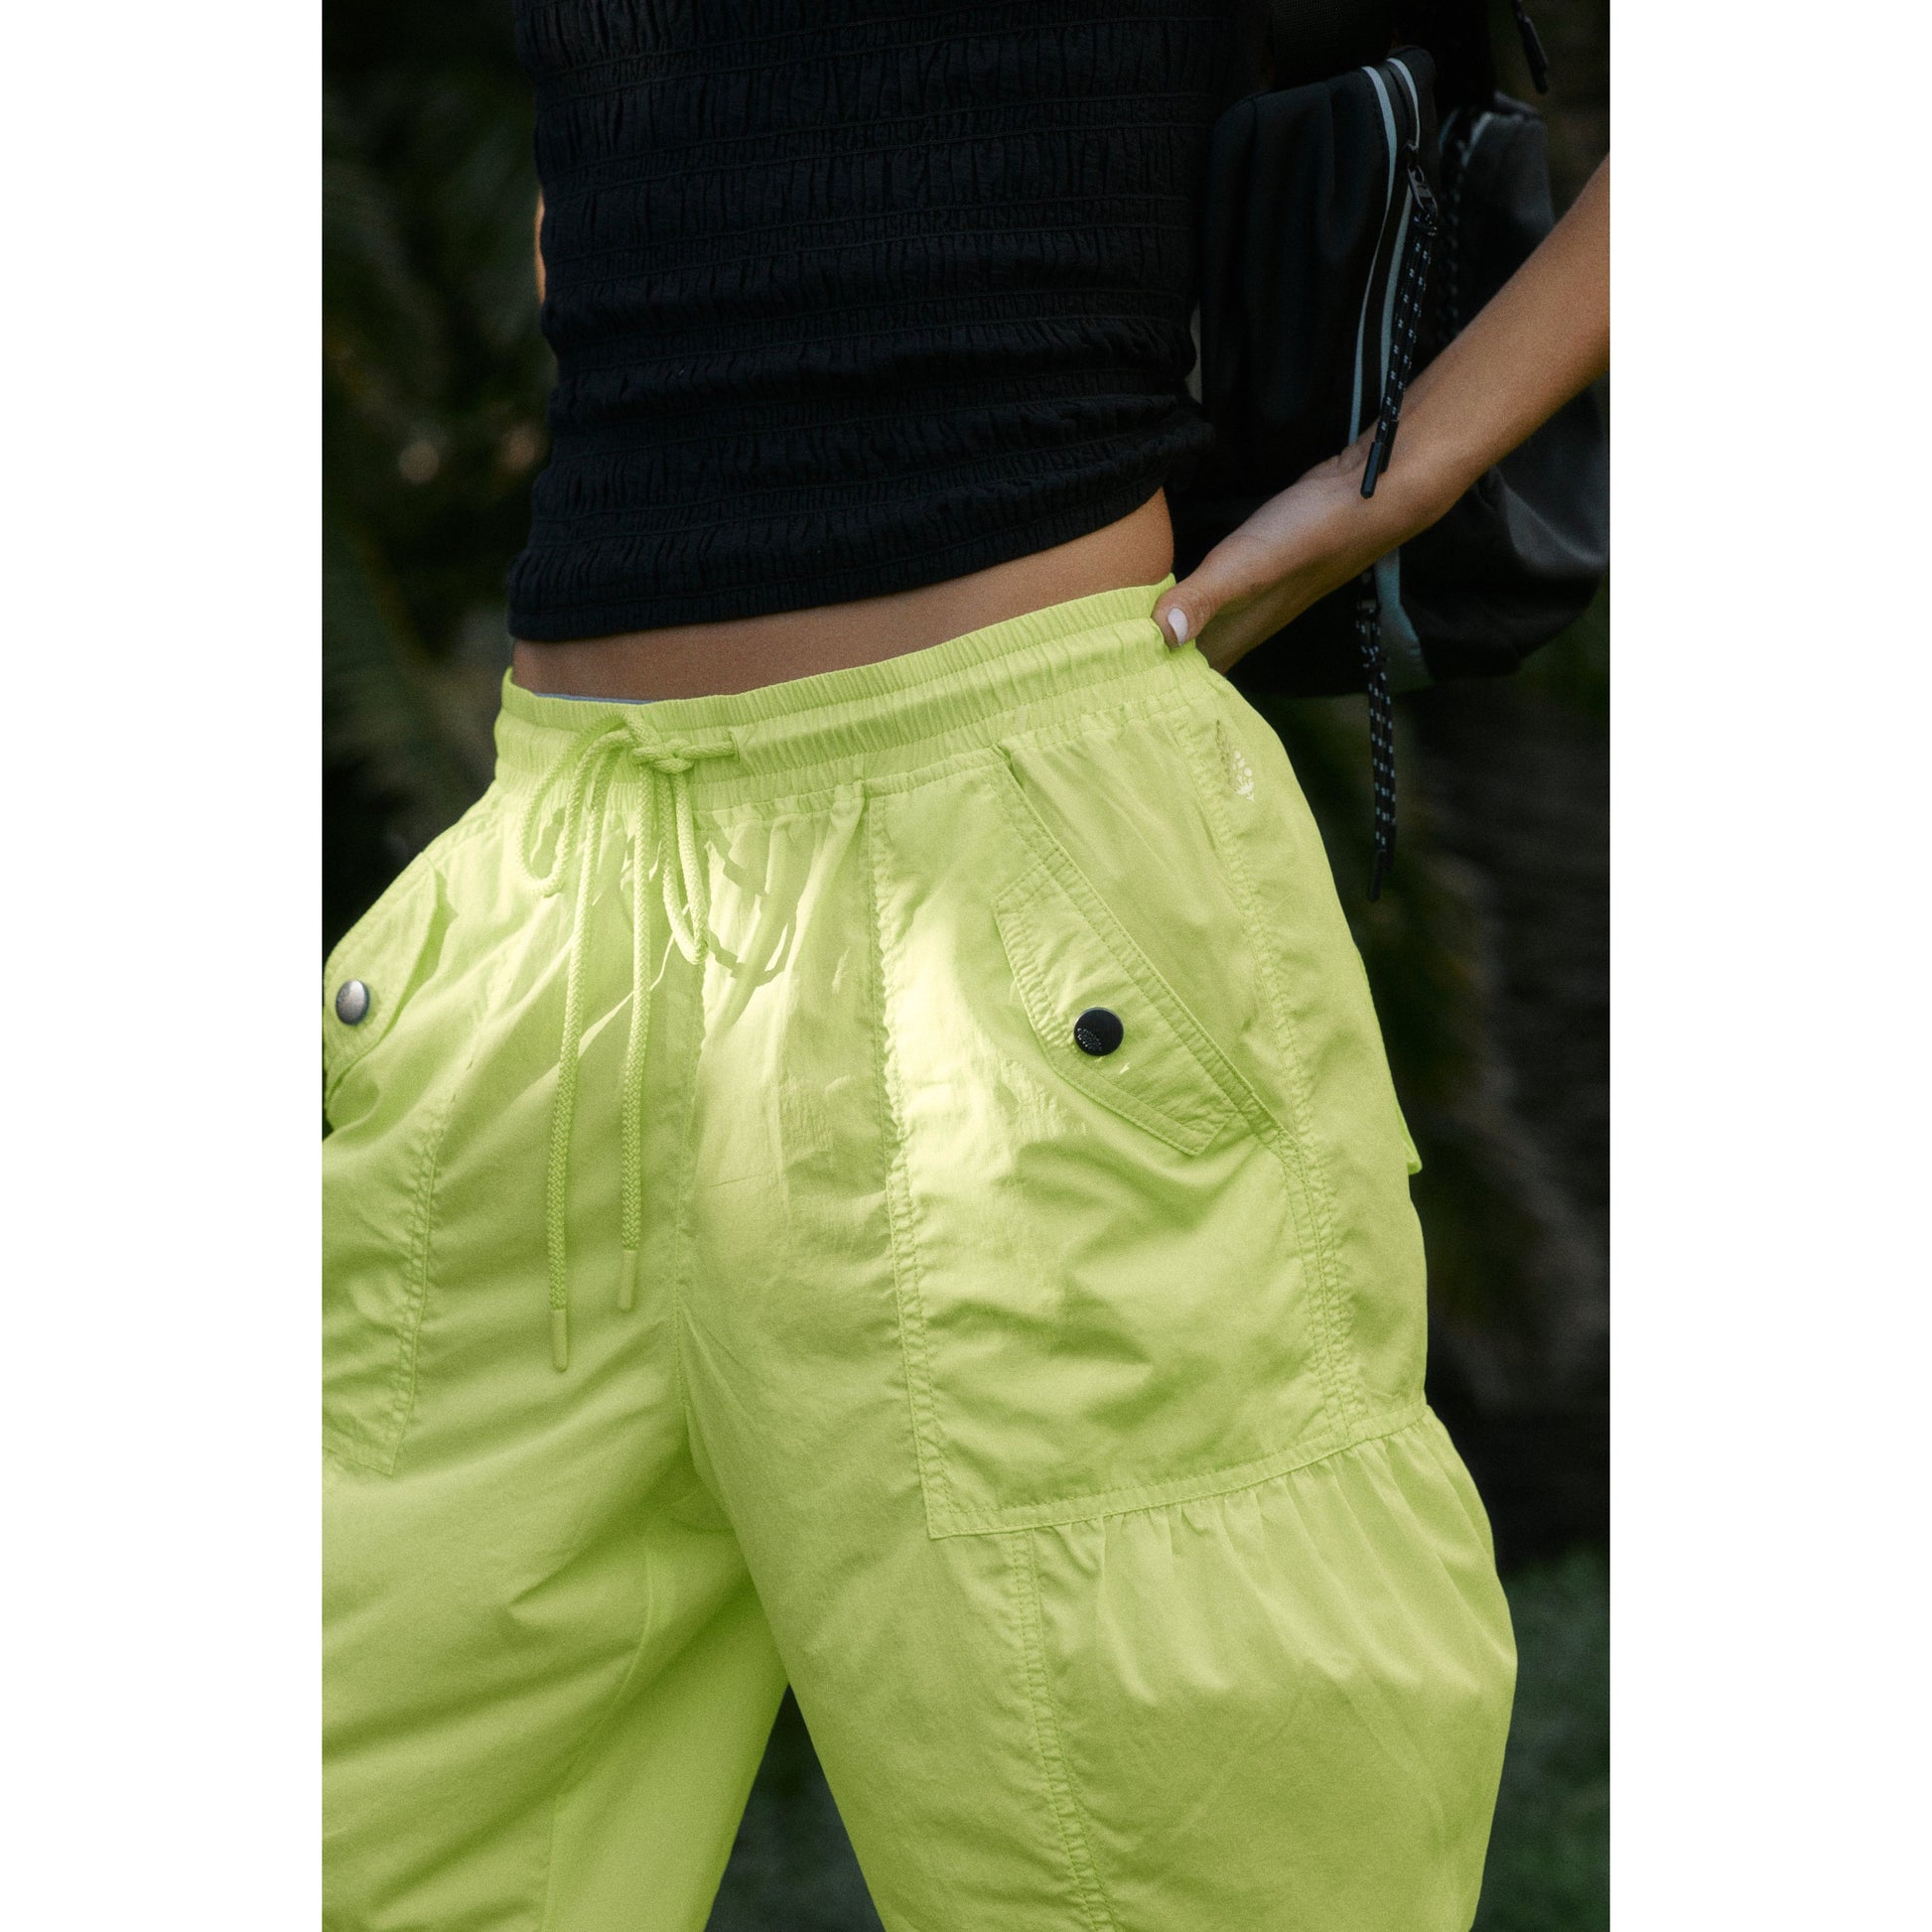 Close-up of a person wearing Free People Movement's Set Me Free Pant in Lime with drawstring waist, focusing on the midsection and hands in a tropical setting.